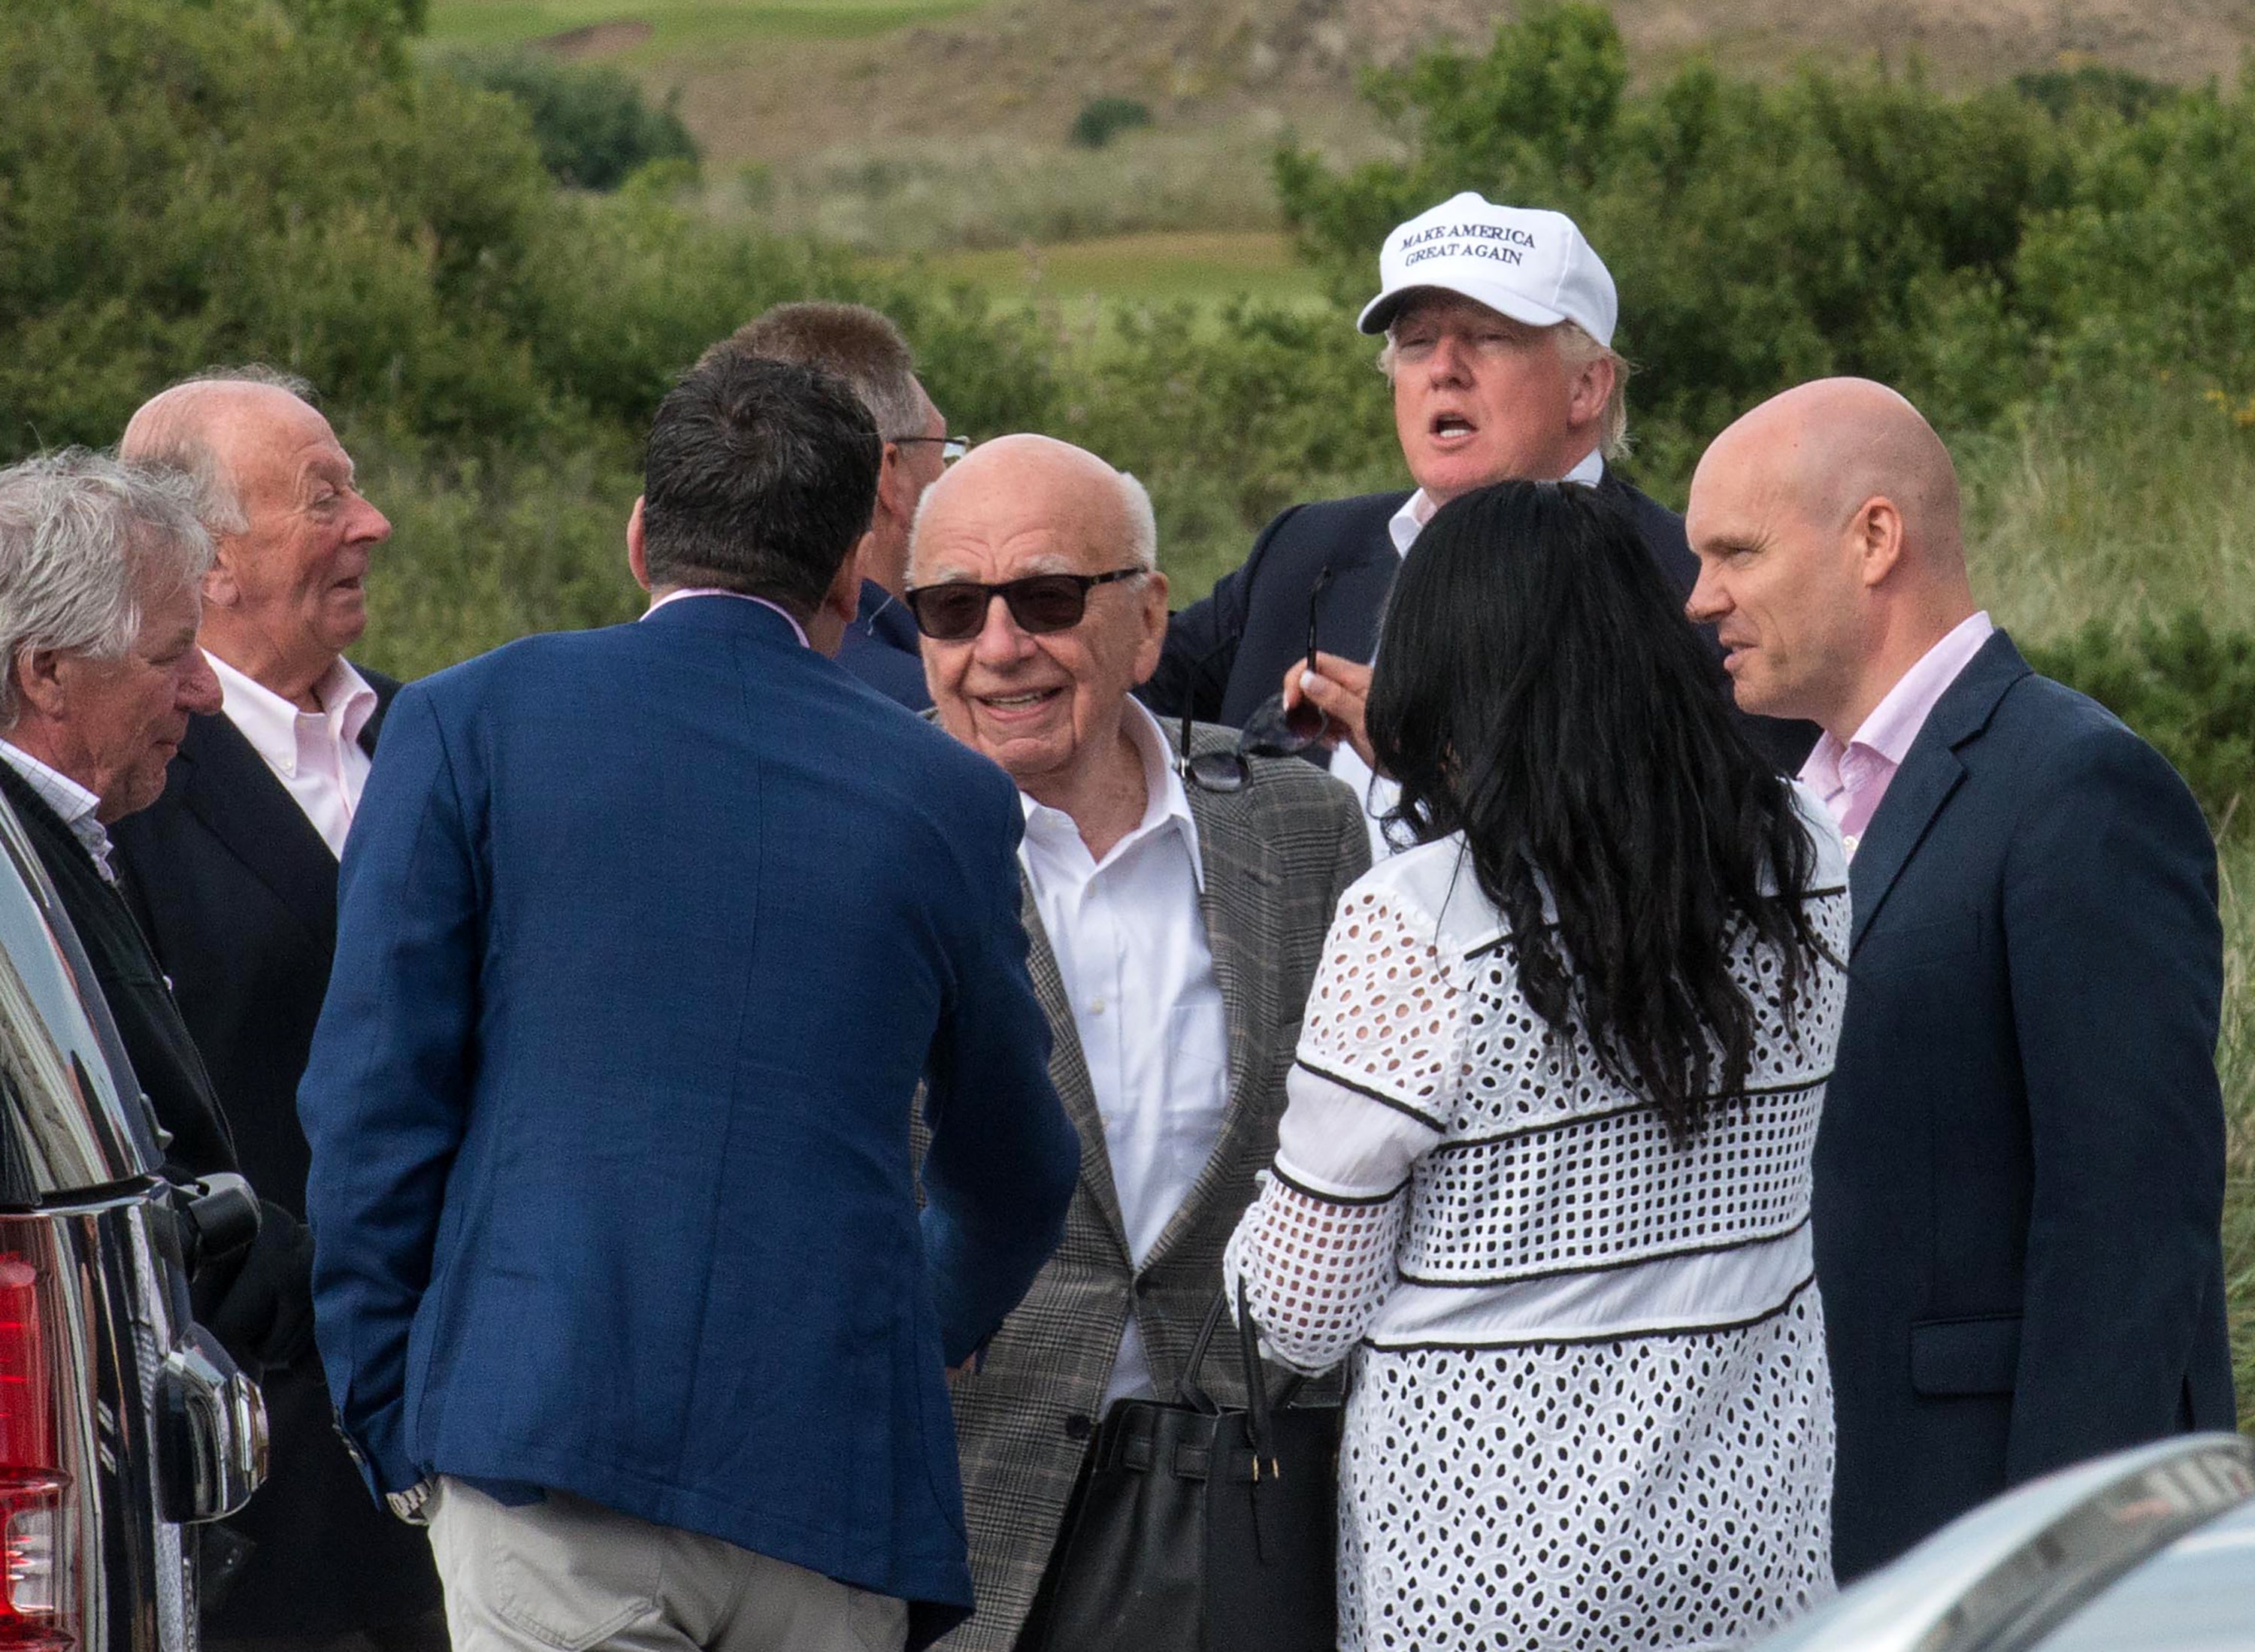 Presumptive Republican presidential nominee Donald Trump (2nd R) leaves with Australian born media magnate Rupert Murdoch (C) after a tour of his International Golf Links course north of Aberdeen on the east coast of Scotland on June 25, 2016